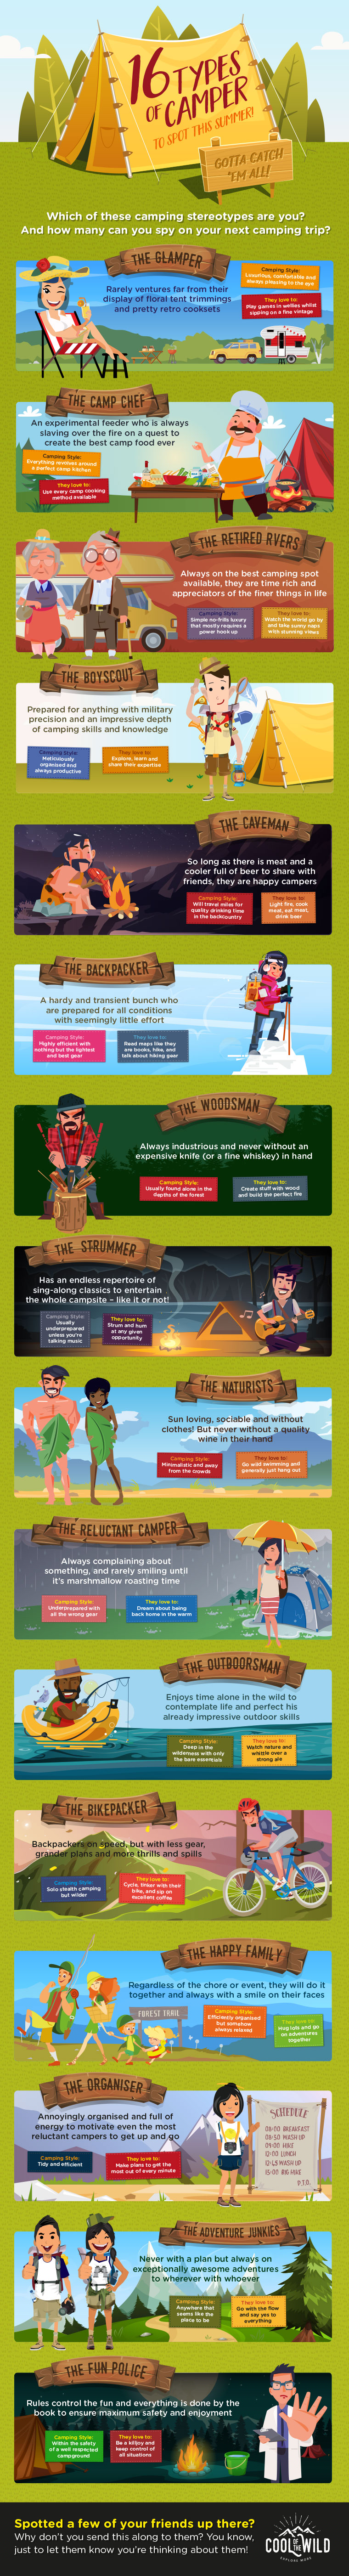 16 types of camper infographic